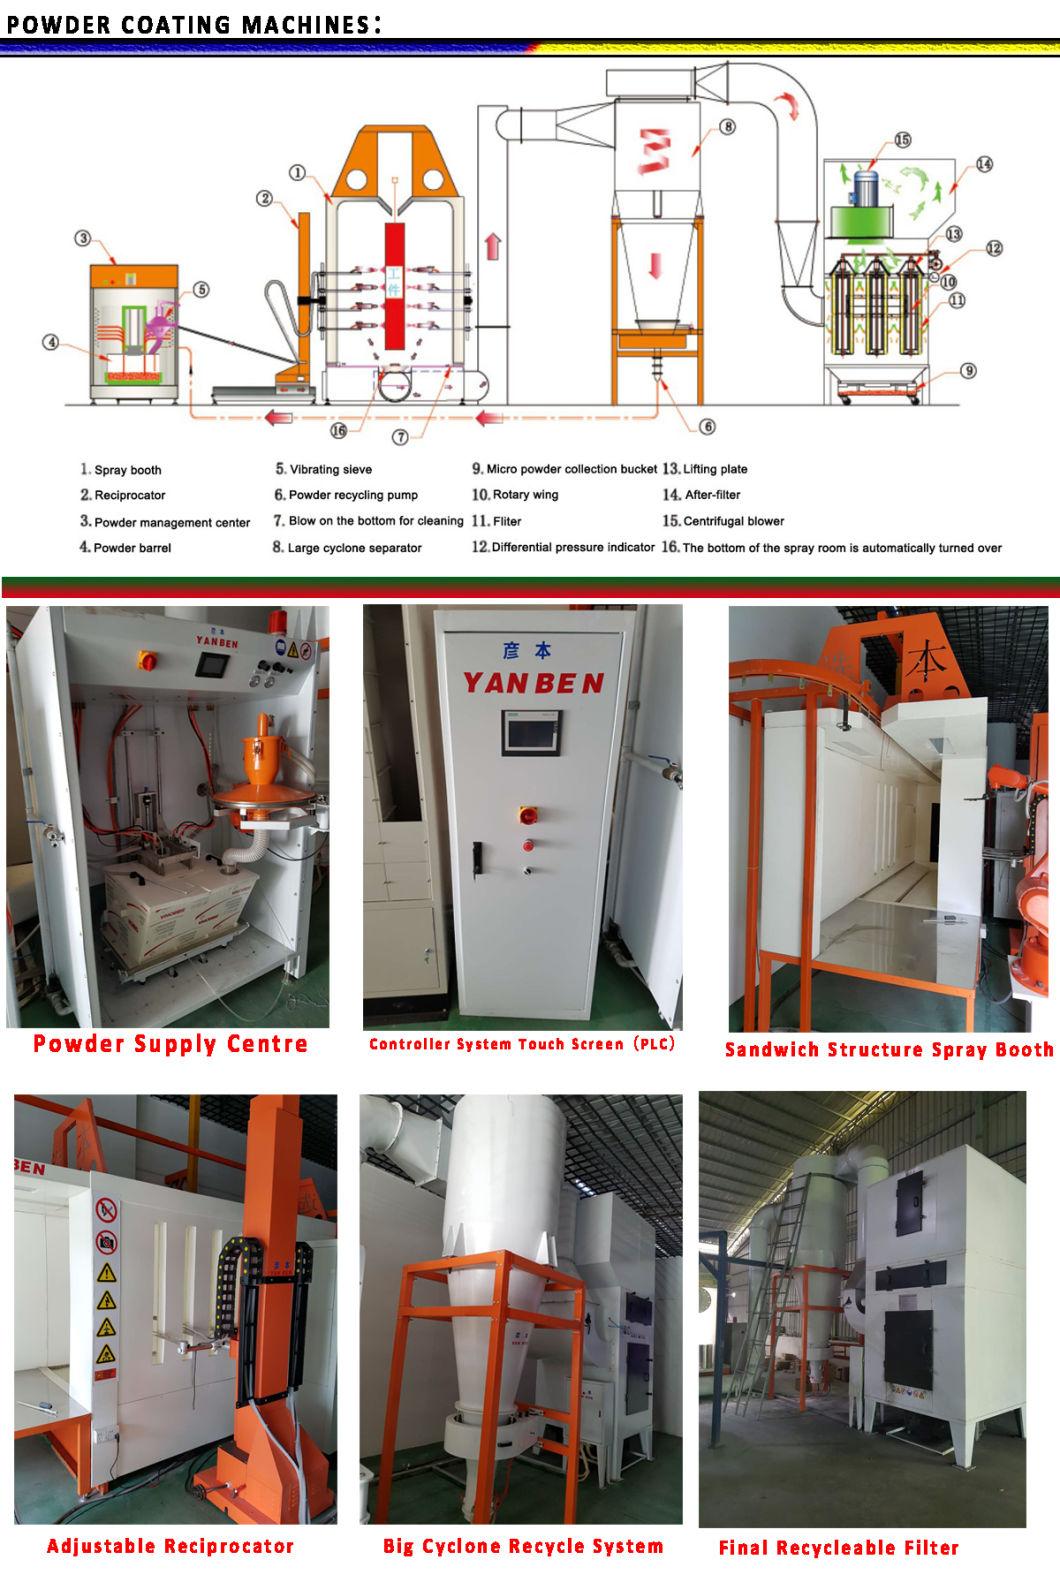 Small Production Acm Grinder/Grinding Machine/Mil for Powder Coating